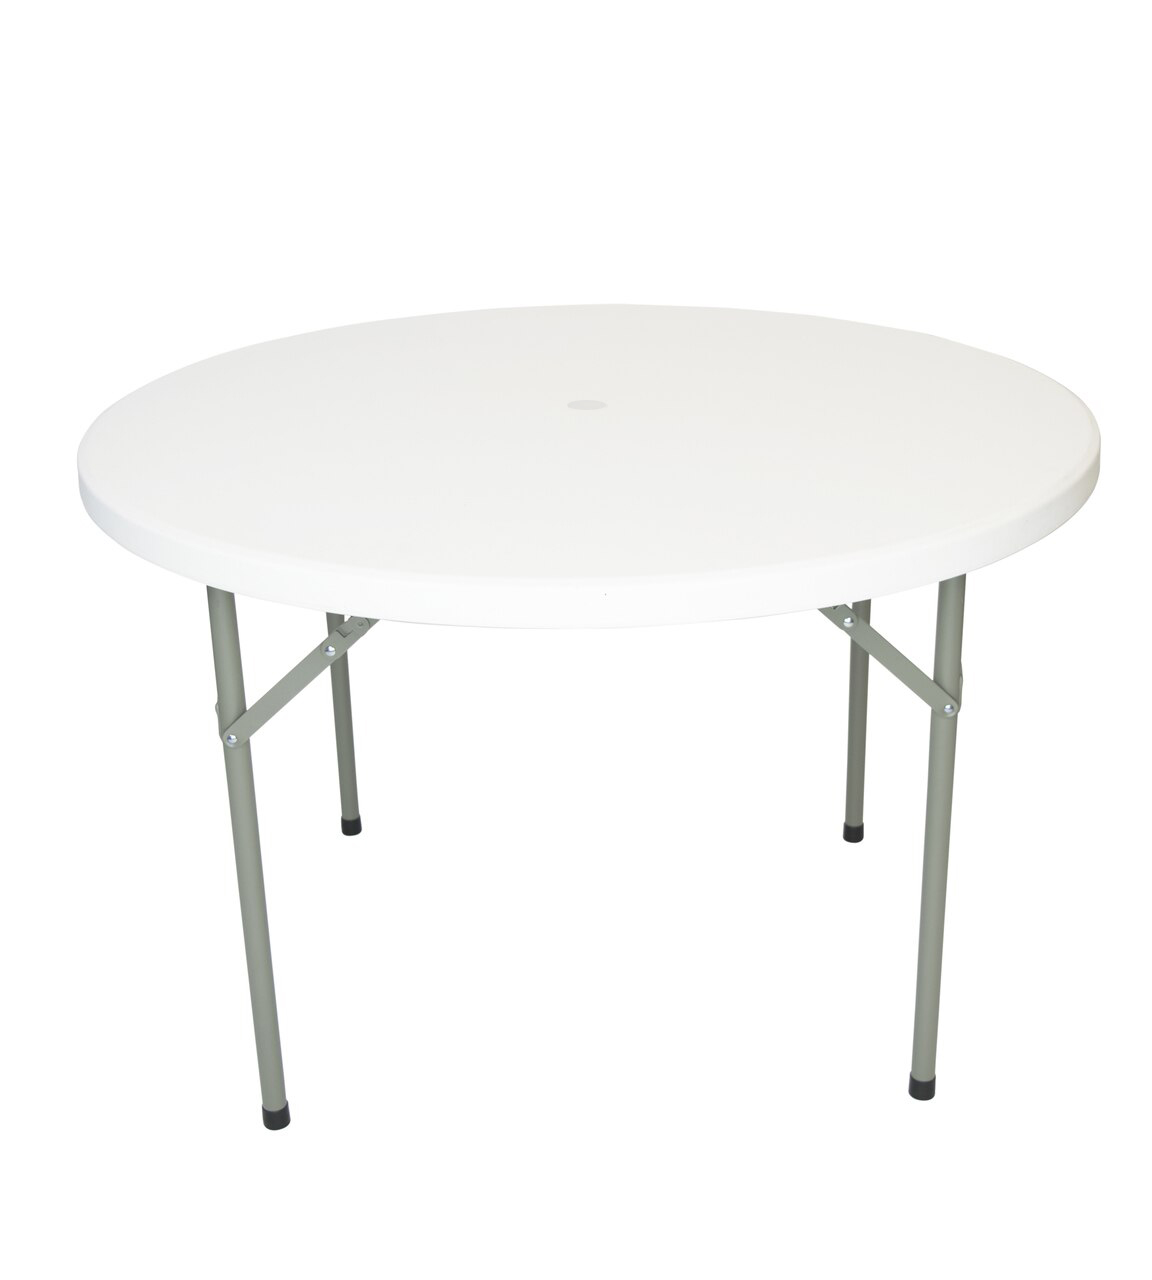 Coffee Table 32'' Round White Plastic Standard Height Folding Table 